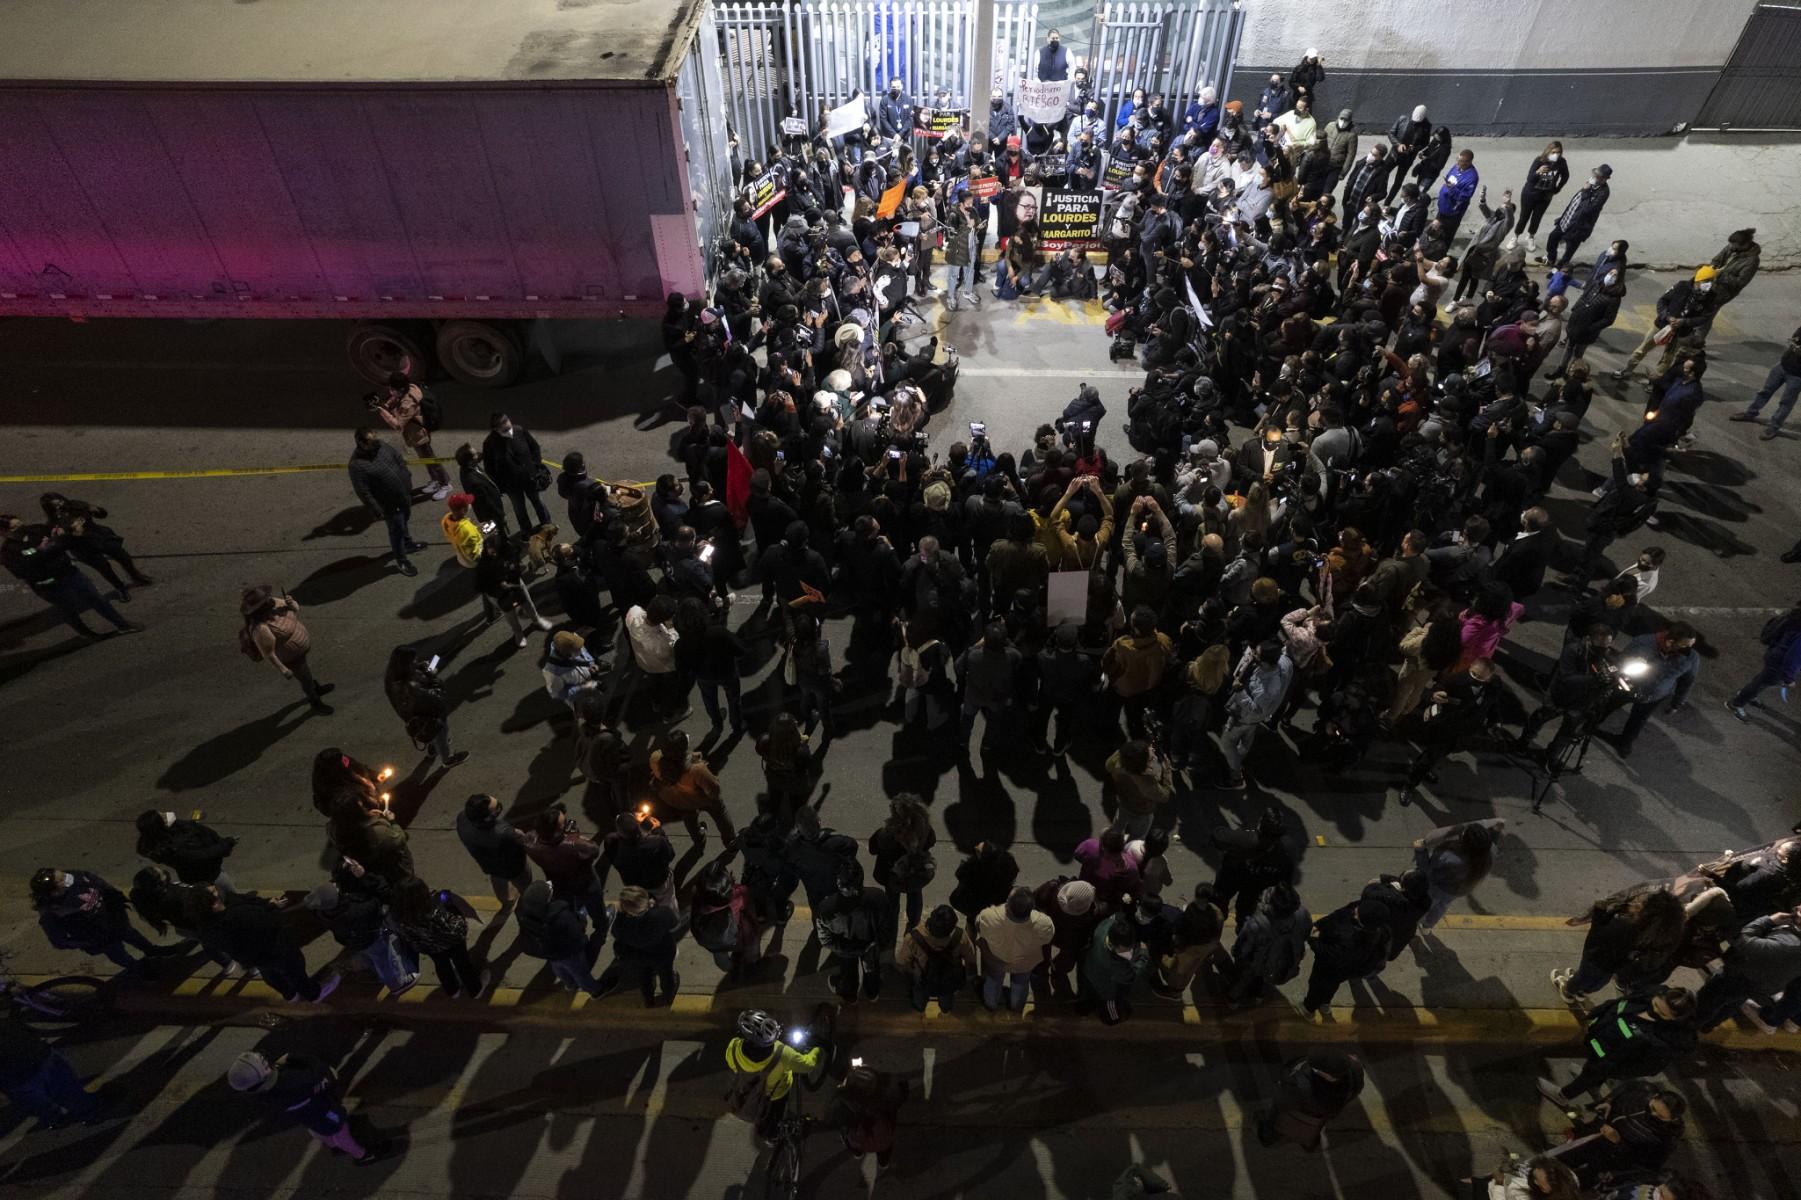 Aerial view of journalists and supporters protesting the murders of their colleagues Lourdes Maldonado and Margarito Martinez, in front of the federal prosecutors building in Tijuana, Baja California, Mexico, on Jan 25. Photo: AFP